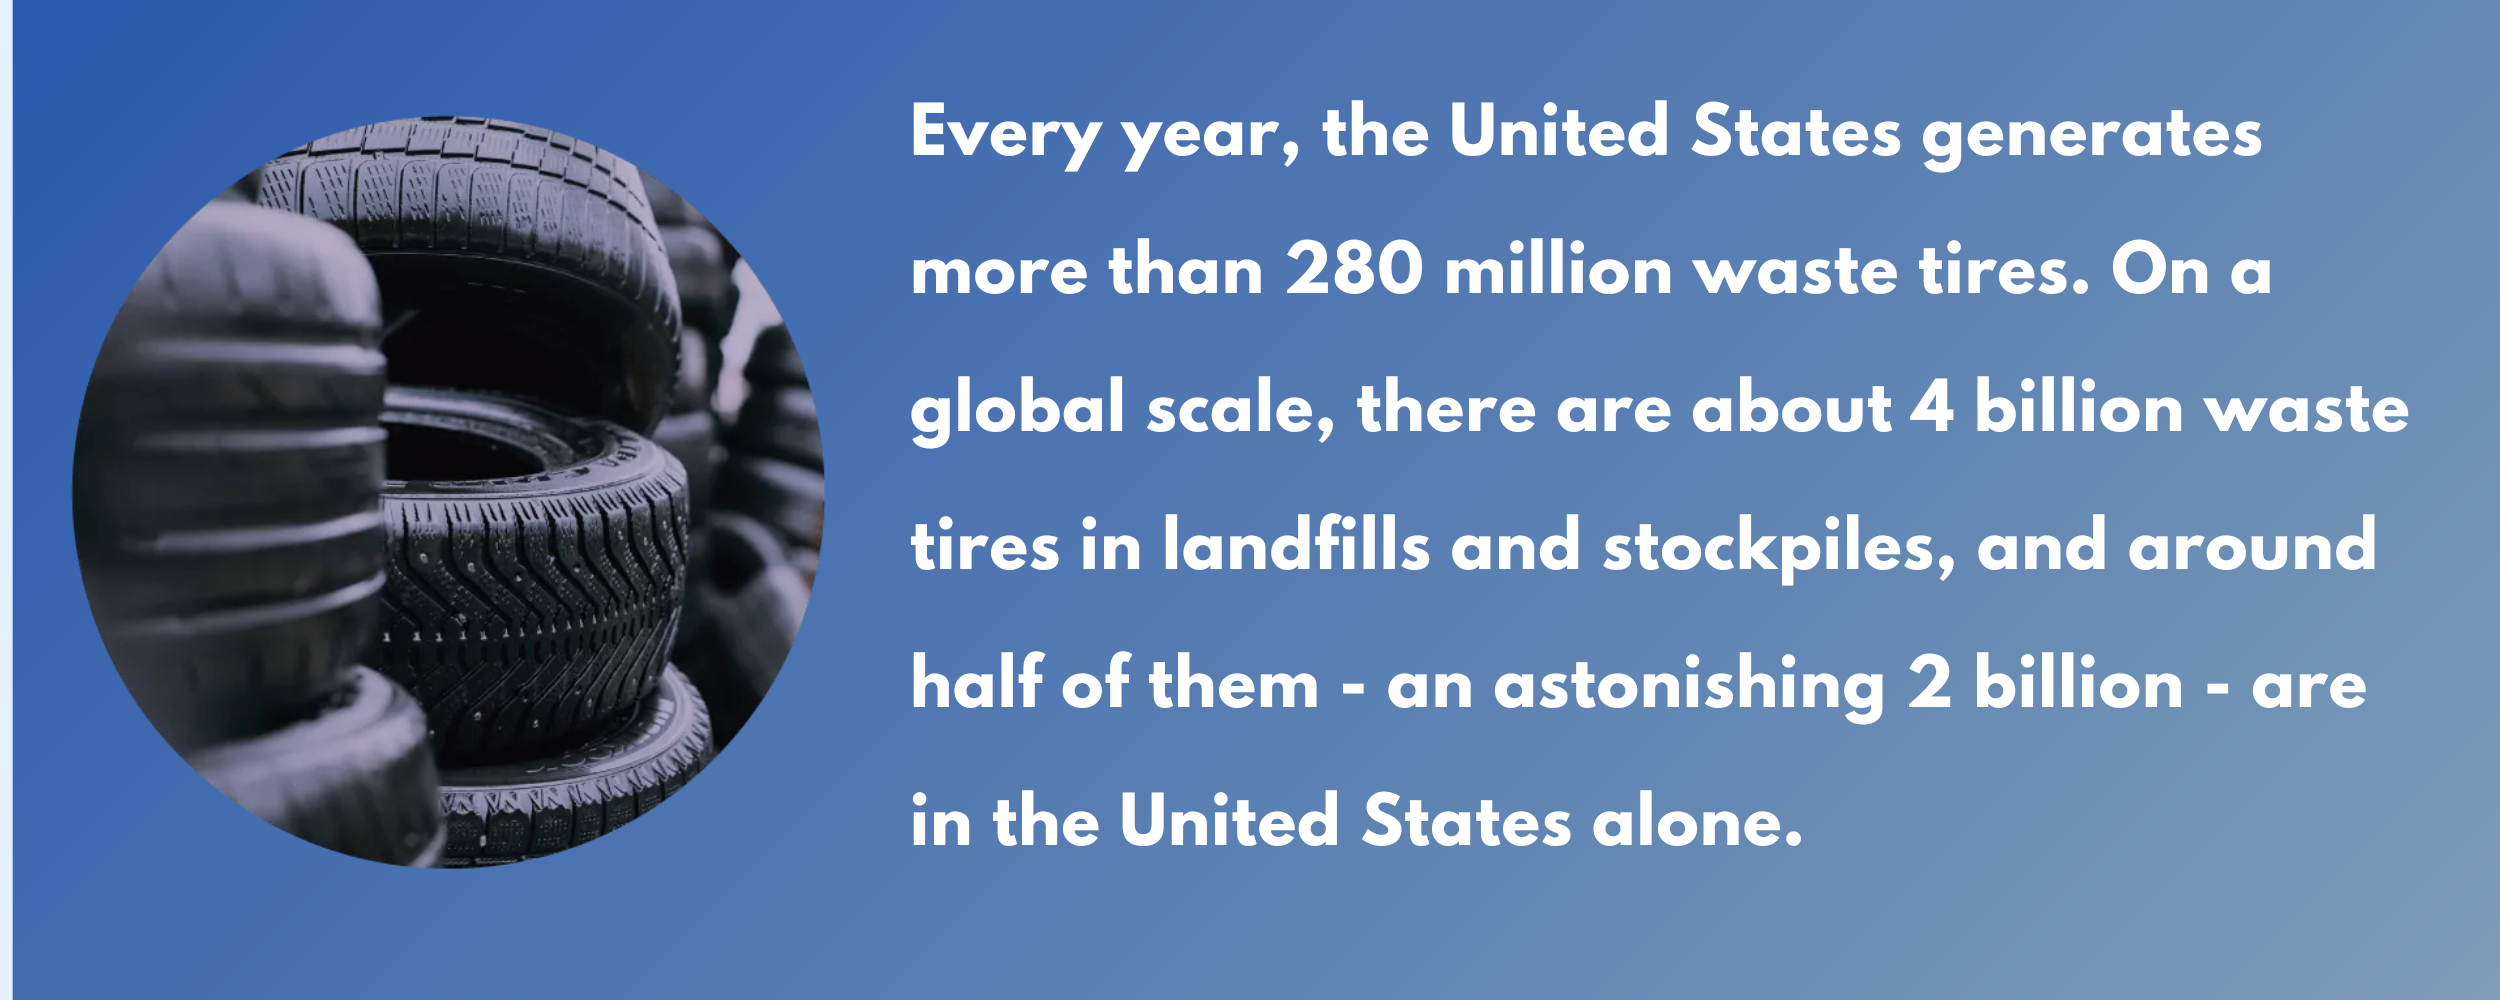 how many waste tires discarded in America vs worldwide